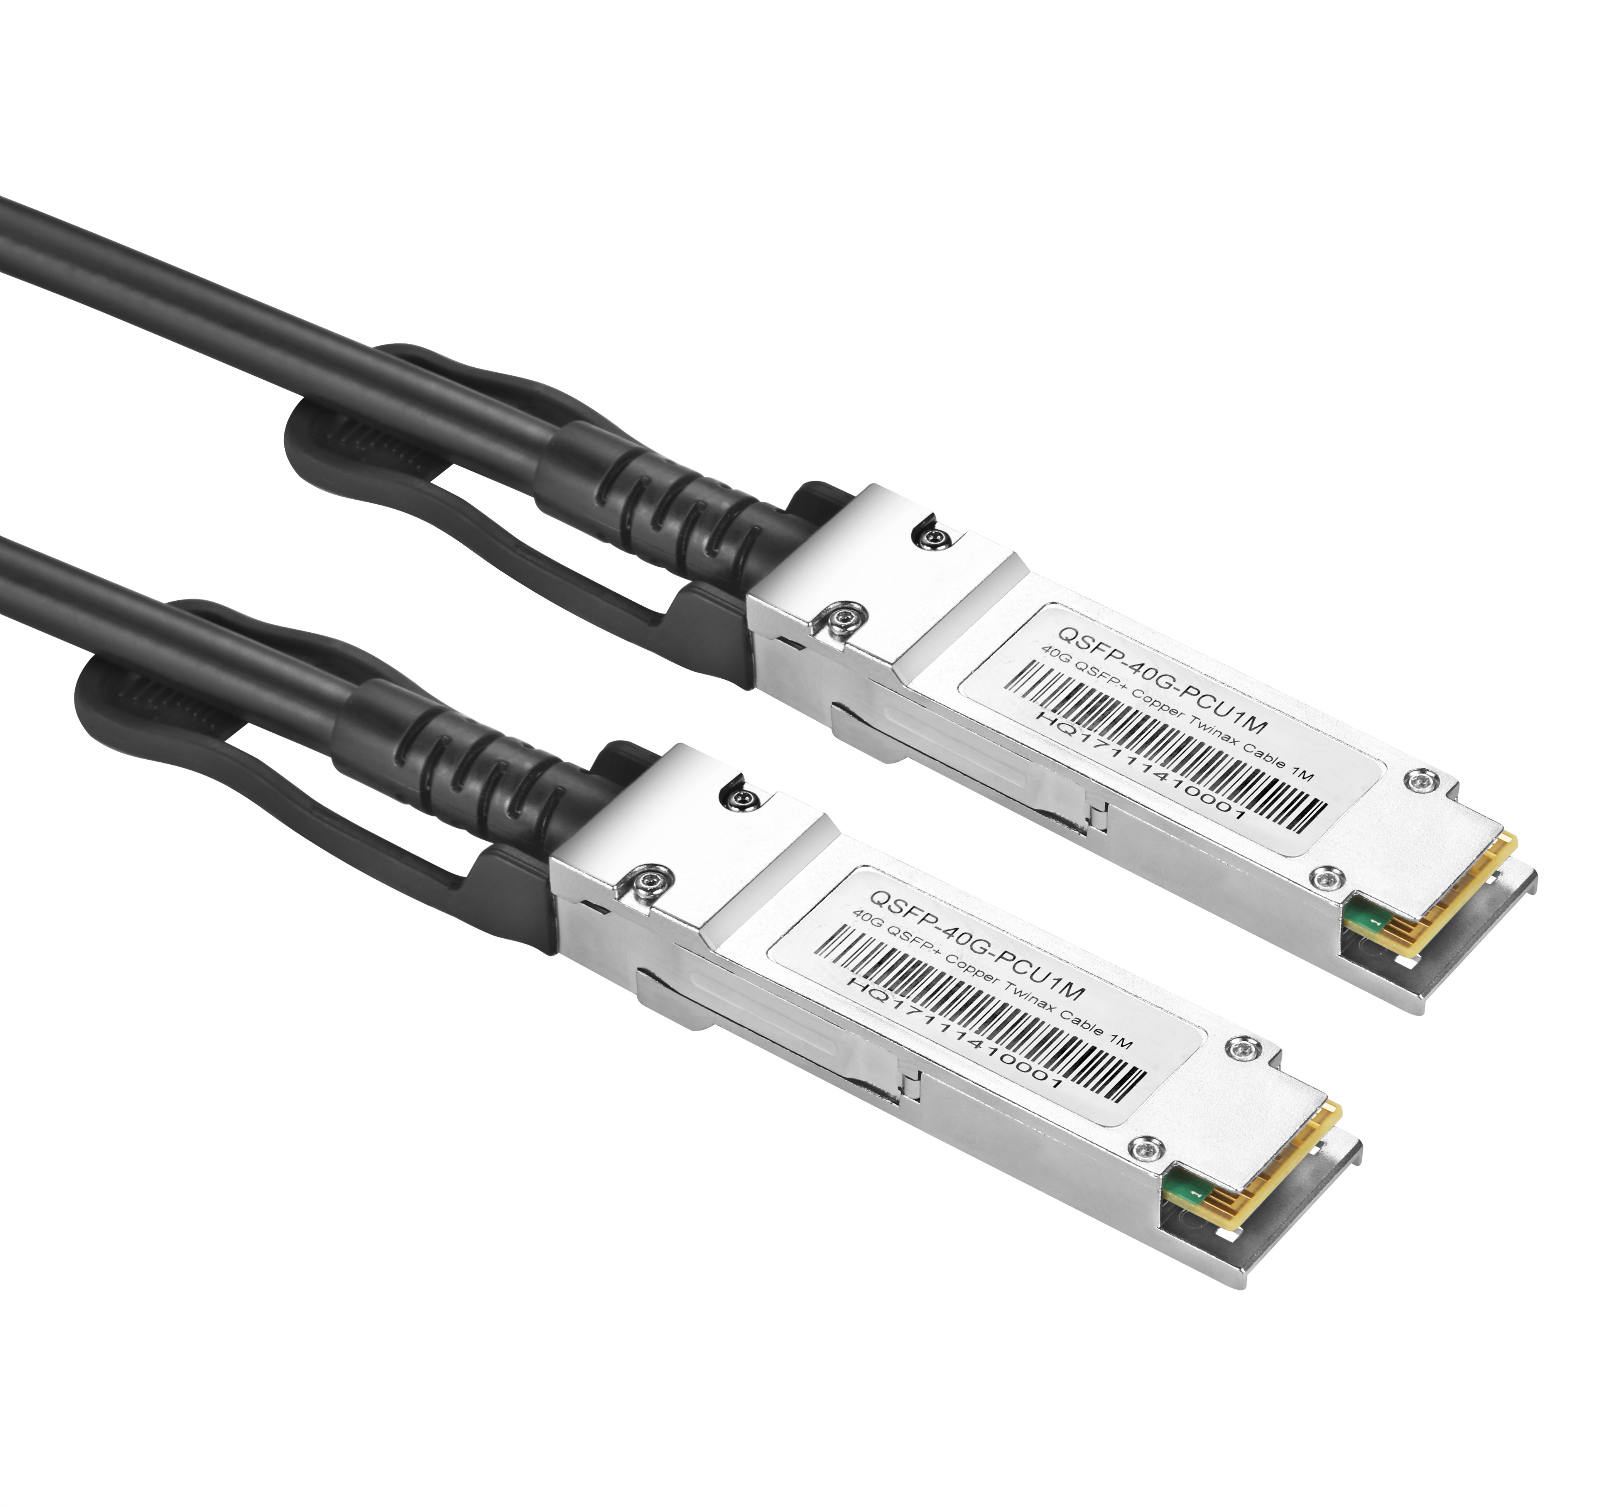 DAC Cablepreferred HTD-Infor,its price is areasonable,econo